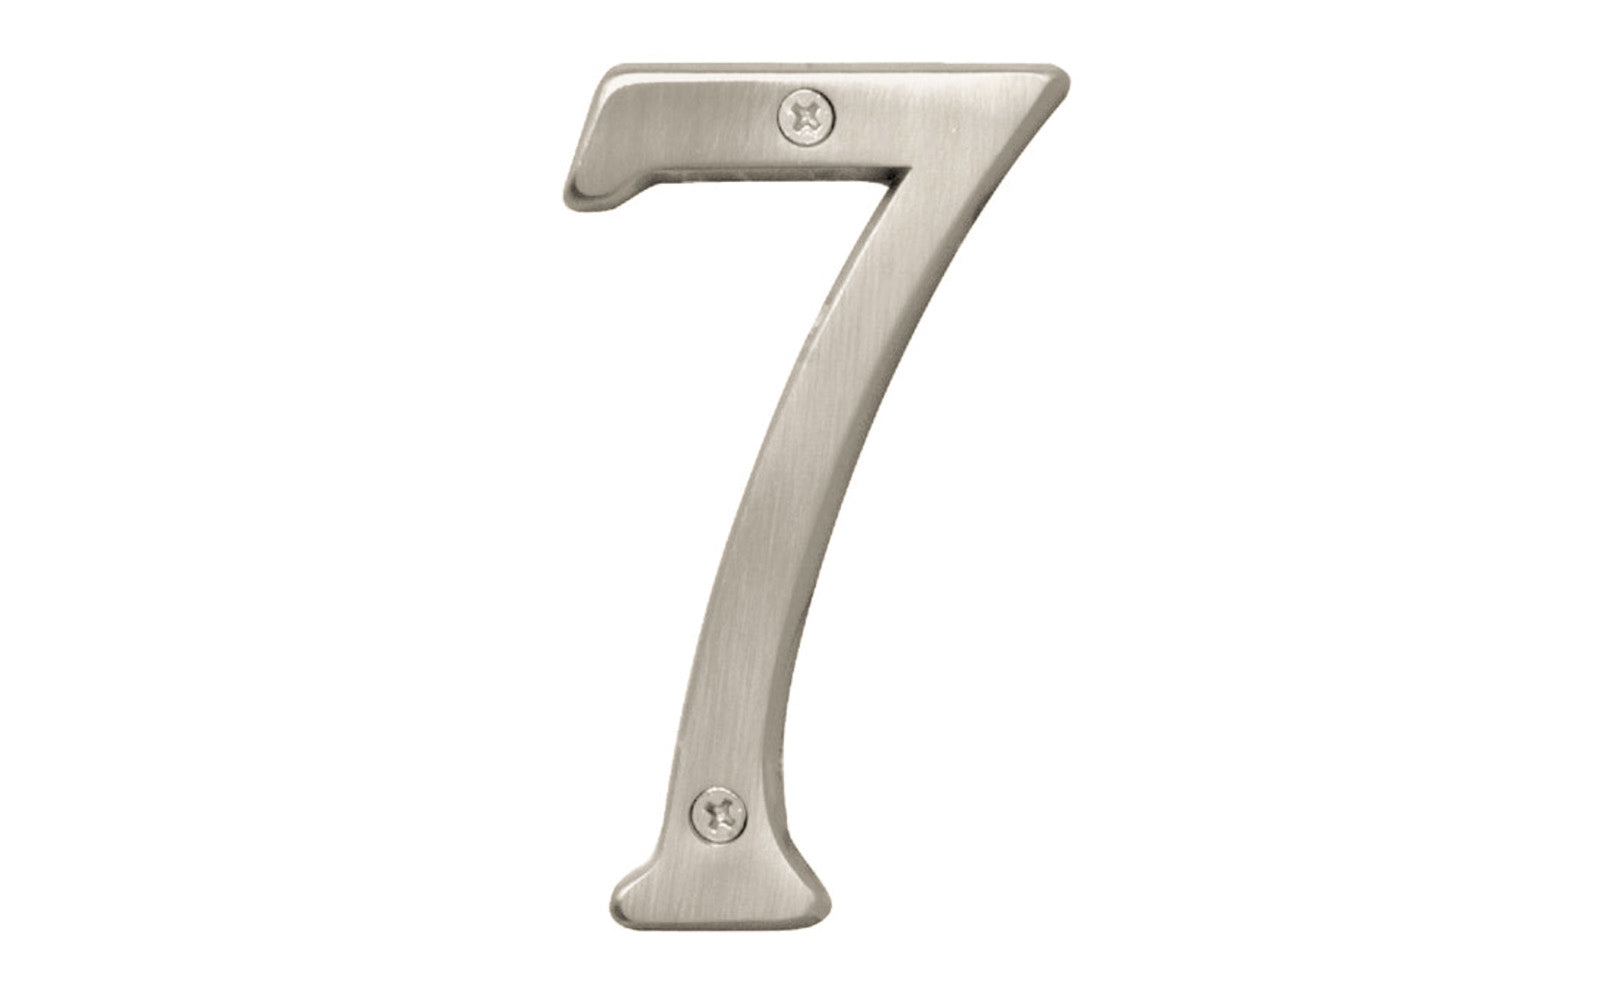 Number Seven House Number in a 4" size. Satin nickel finish. Includes two phillips flat head screws. #7 house number. Hy-Ko Model BR-43SN/7.  Hardware house numbers for outdoors. Includes screws. 029069309374. #7 Satin Nickel House Number - 4" Size